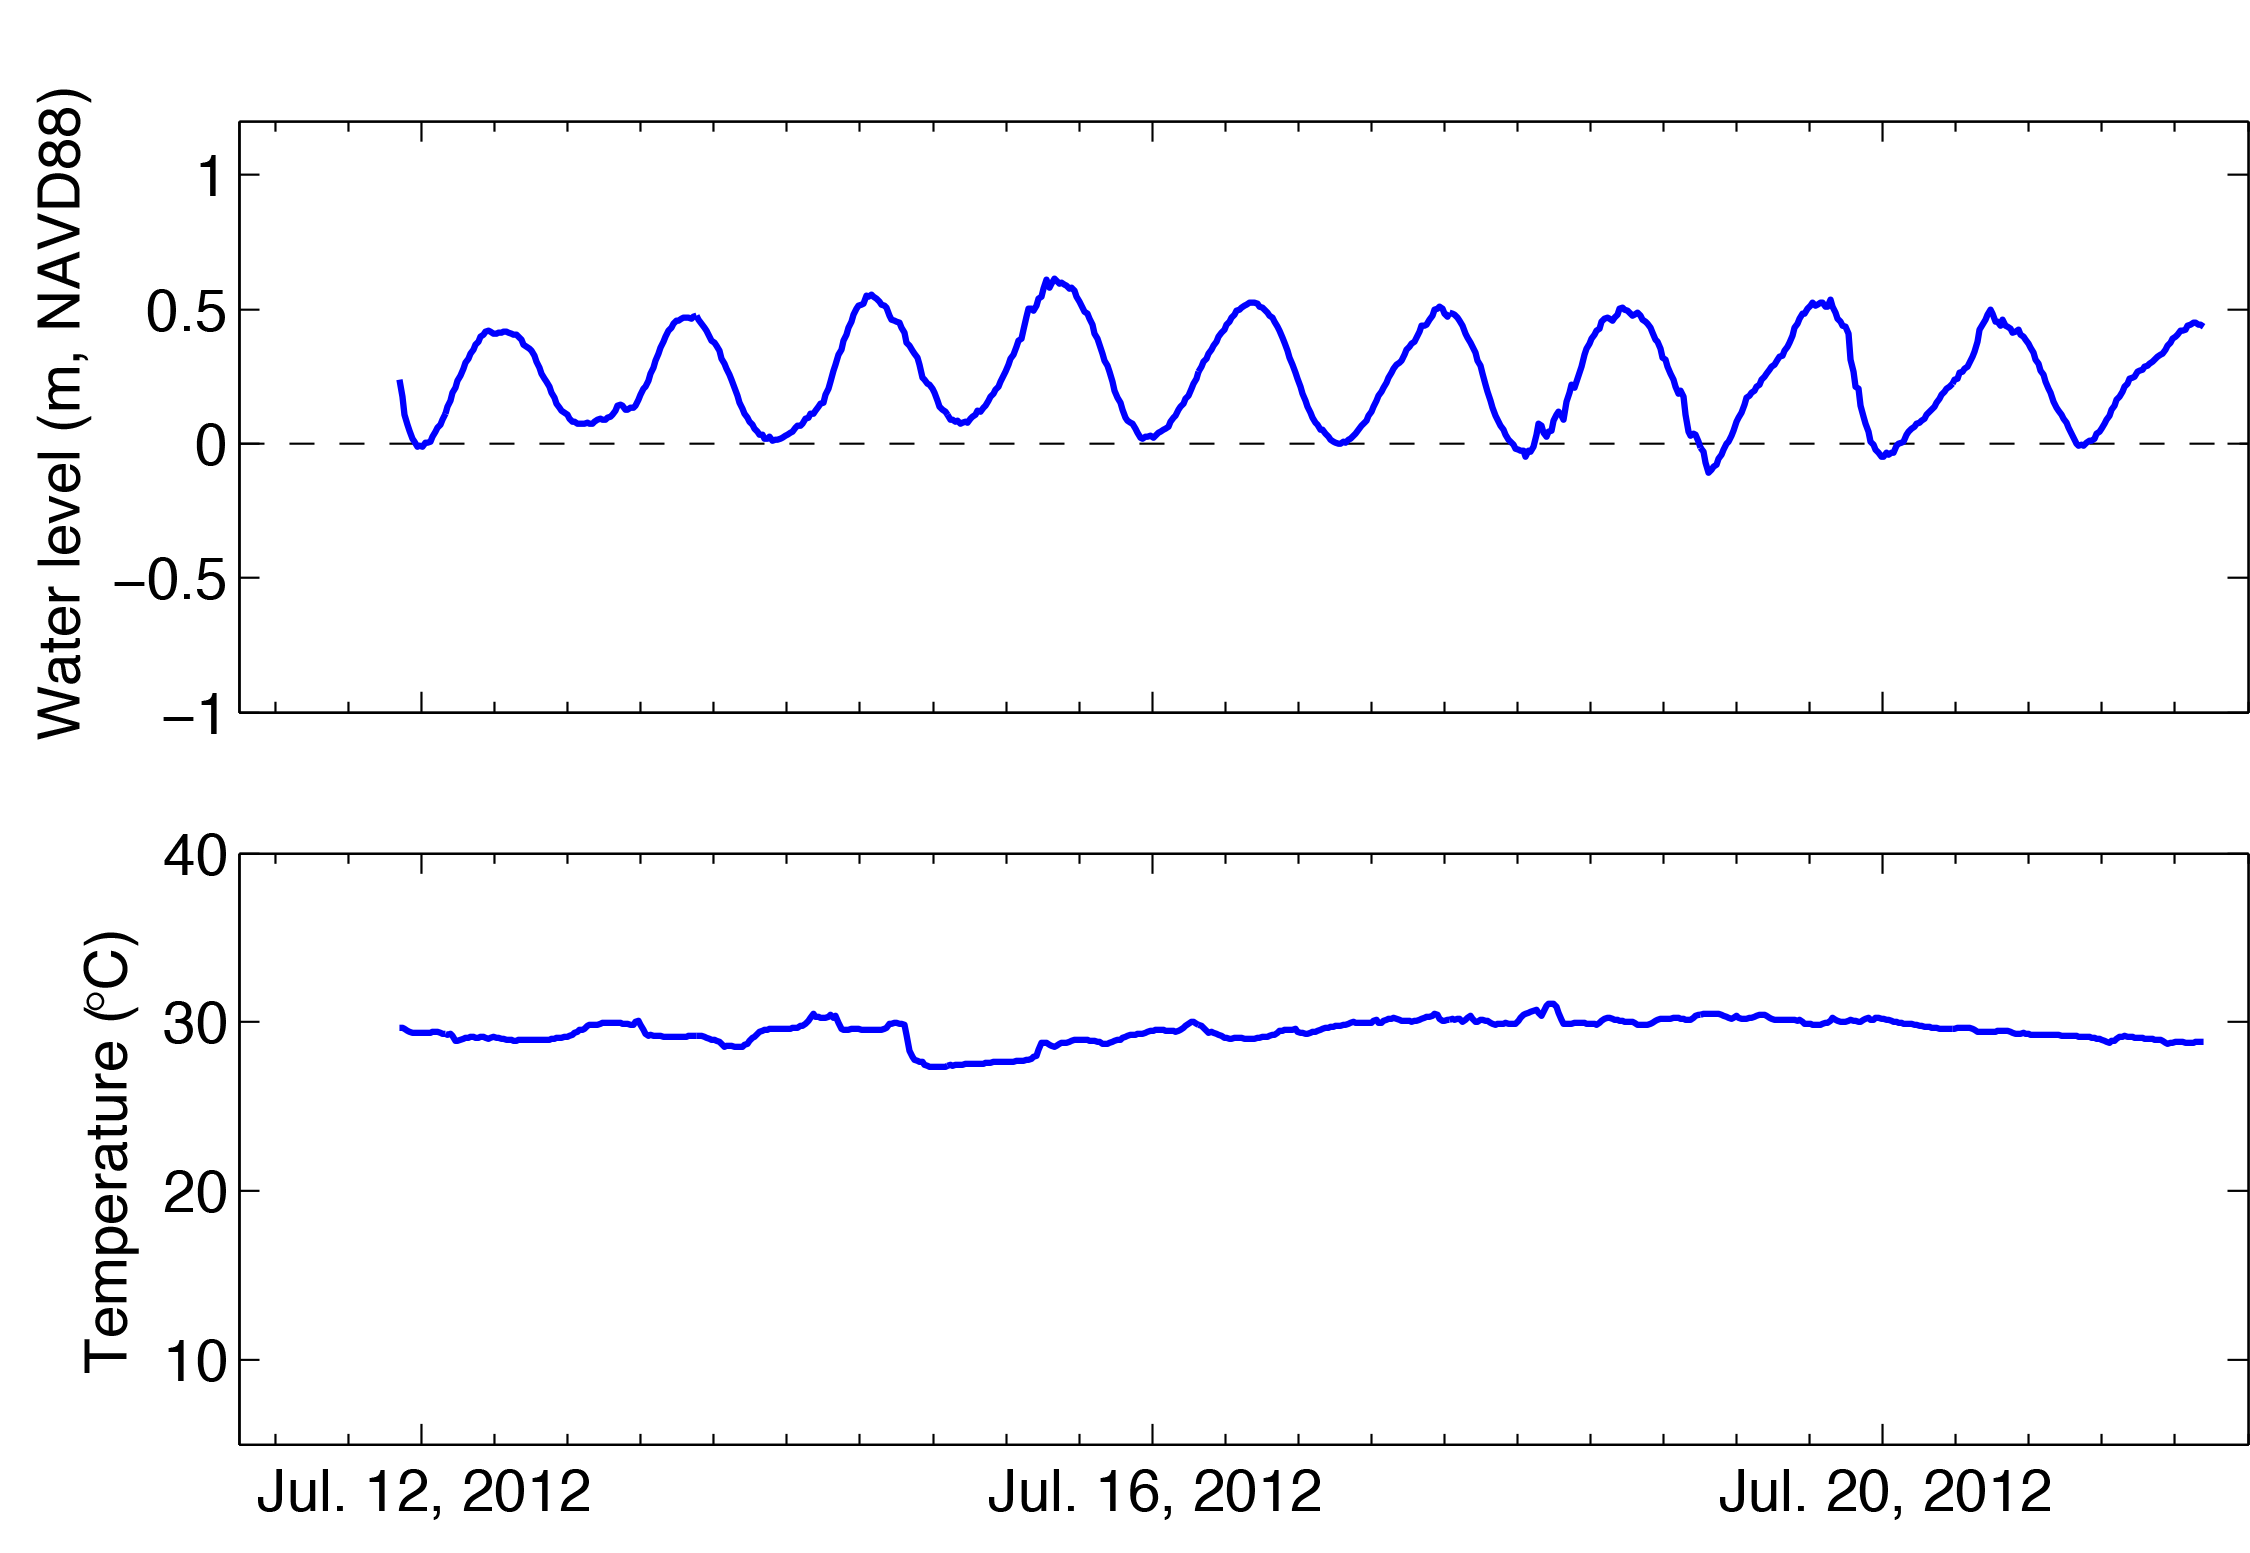 water level and temperature time series from a sea-bird 